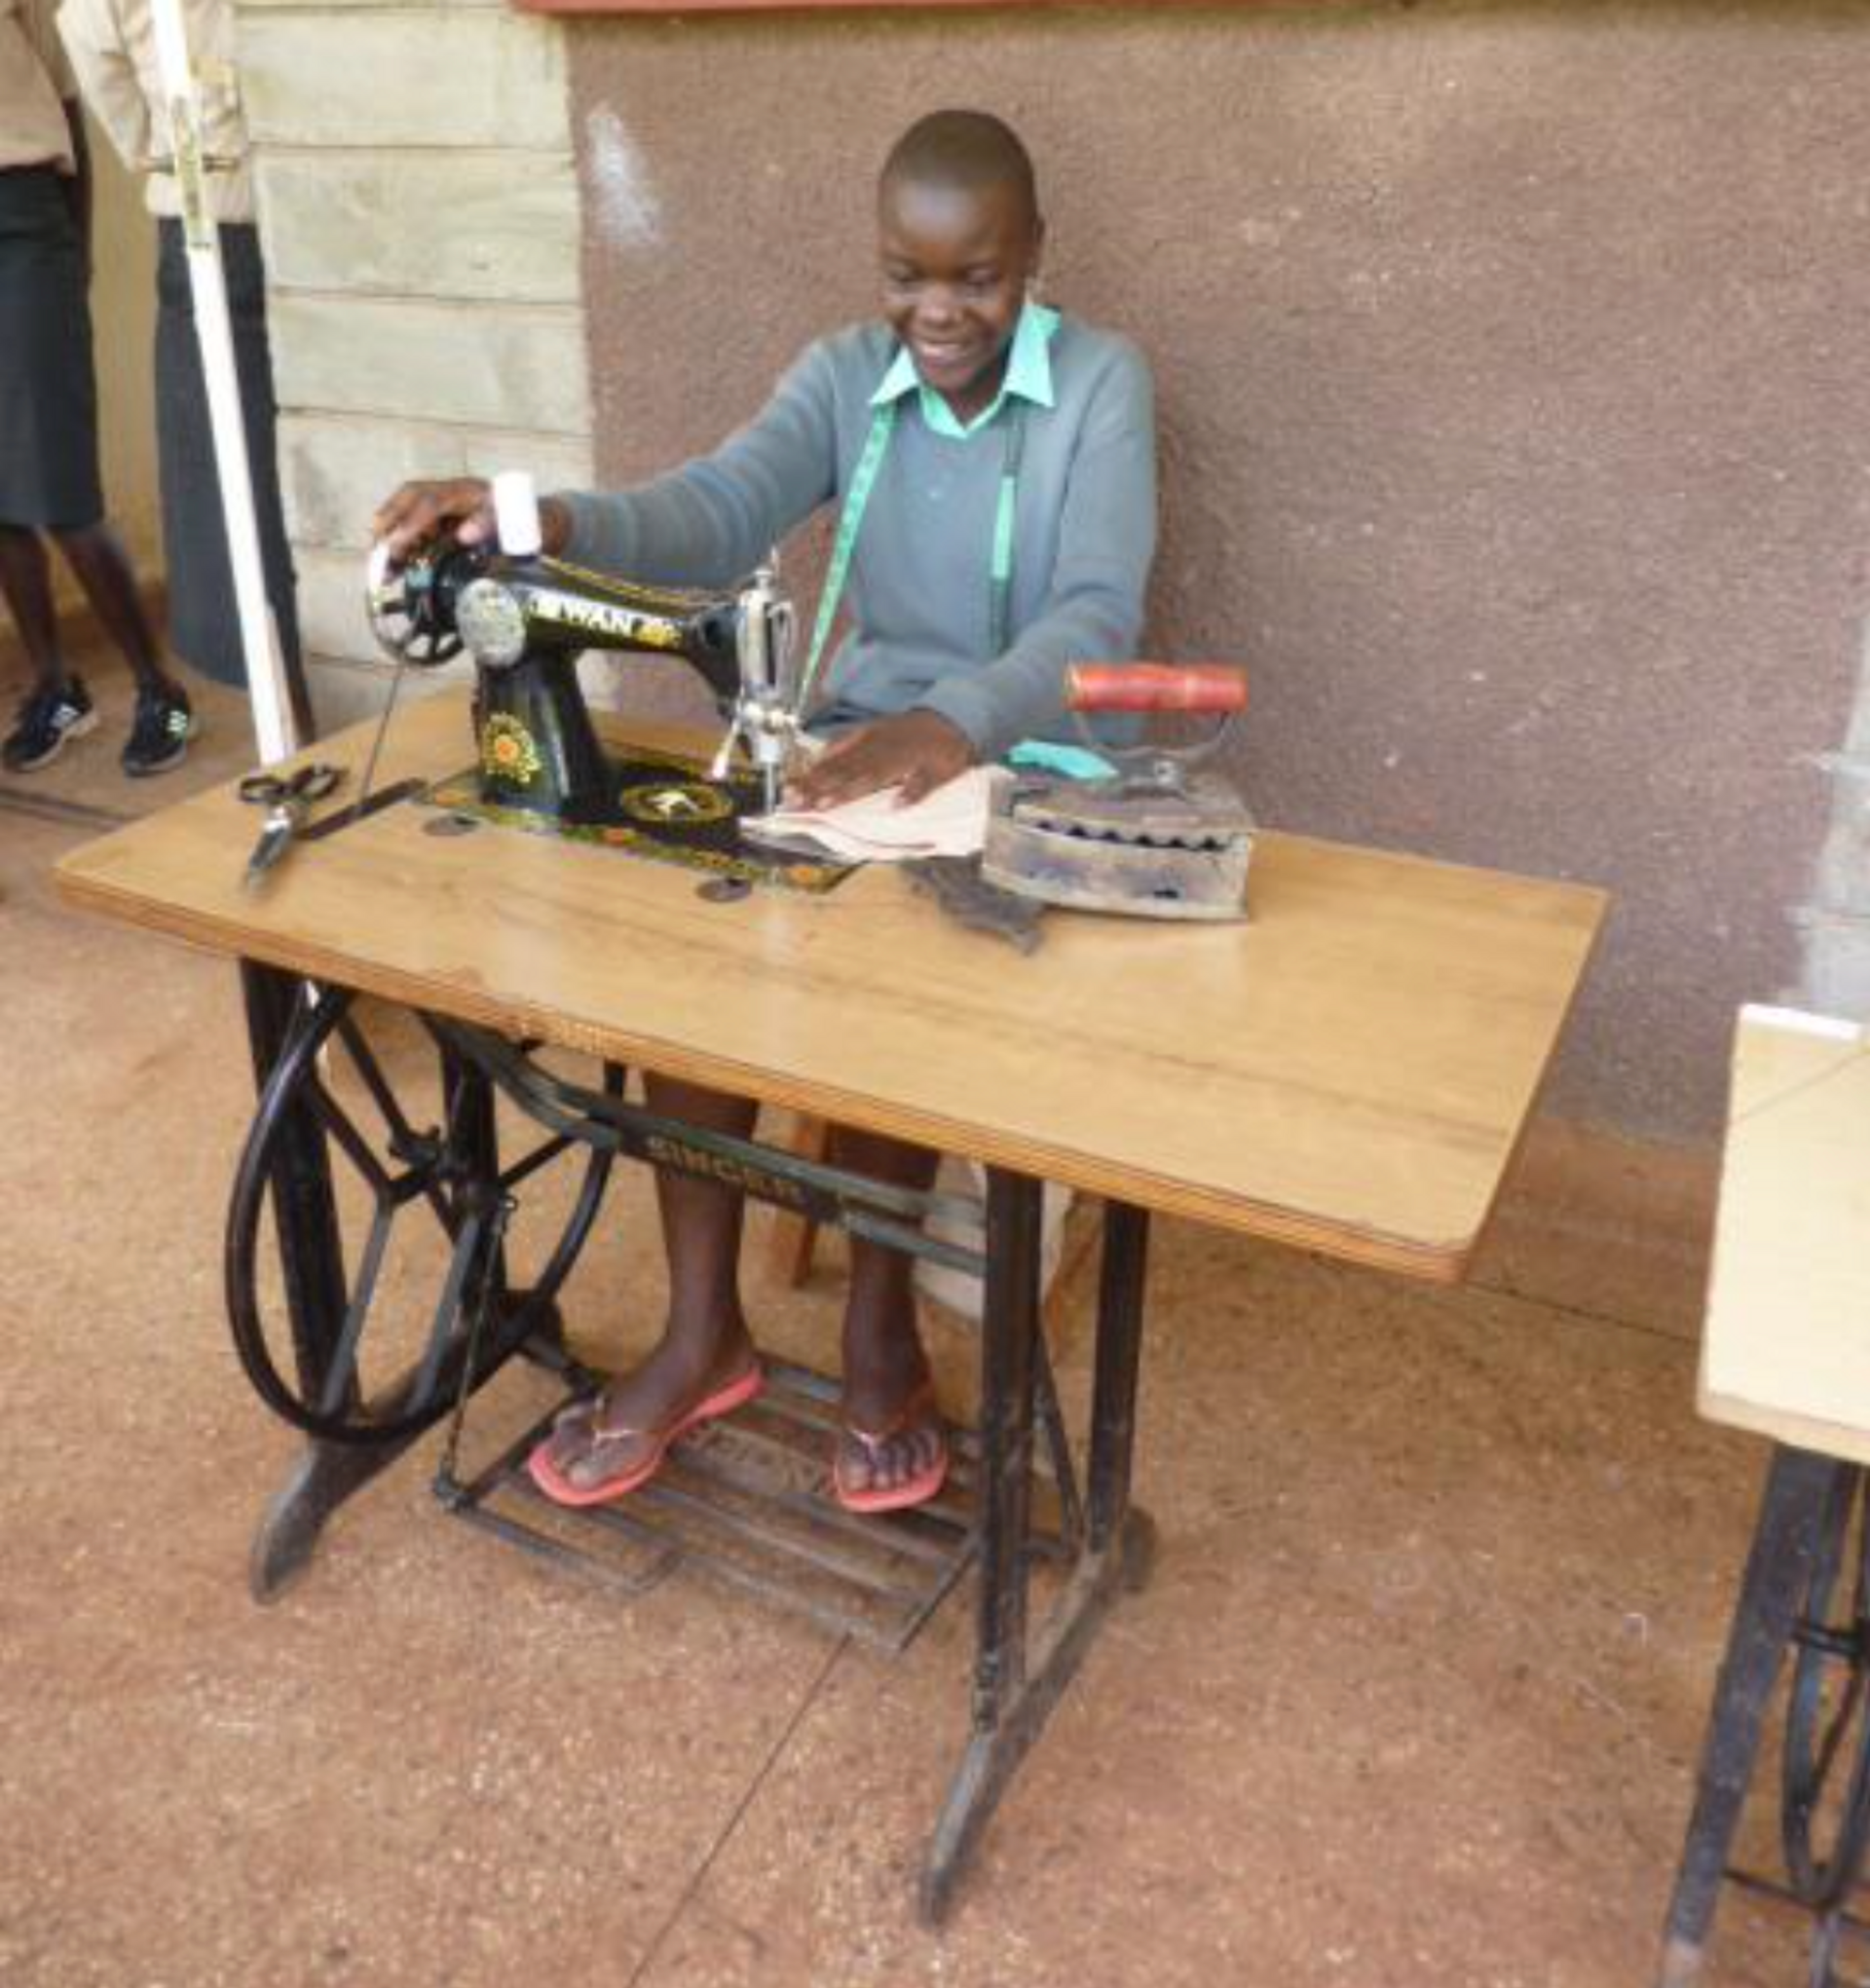 Damaris came to W.O.R.K. as a teenager and was not eligible for Secondary school. W.O.R.K. placed her in a Vocational Training Centre where she completed a National Certificate in Tailoring and Dressmaking. Here she is with the Sewing machine (provided by W.O.R.K.) and she runs her own successful business and is doing well. You can also see the Iron she uses – it works when filled by hot charcoal - no electricity is available!